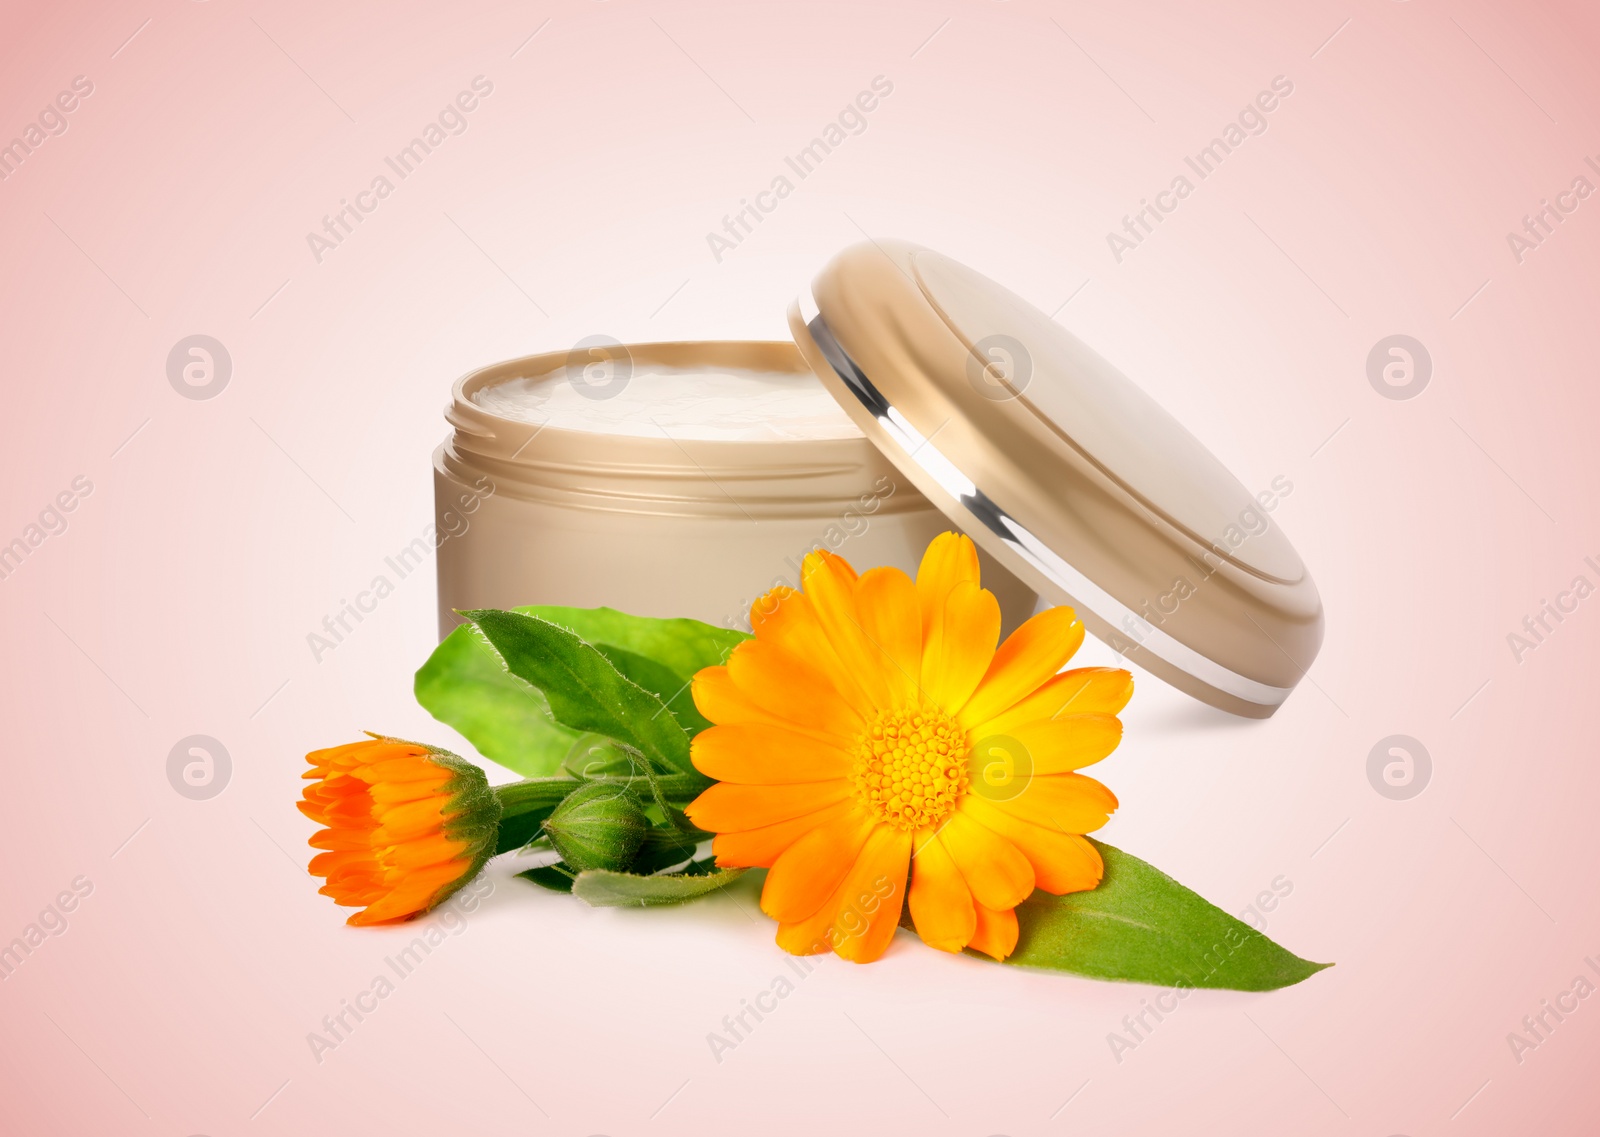 Image of Body cream with calendula extract on pink background. Natural based cosmetic product